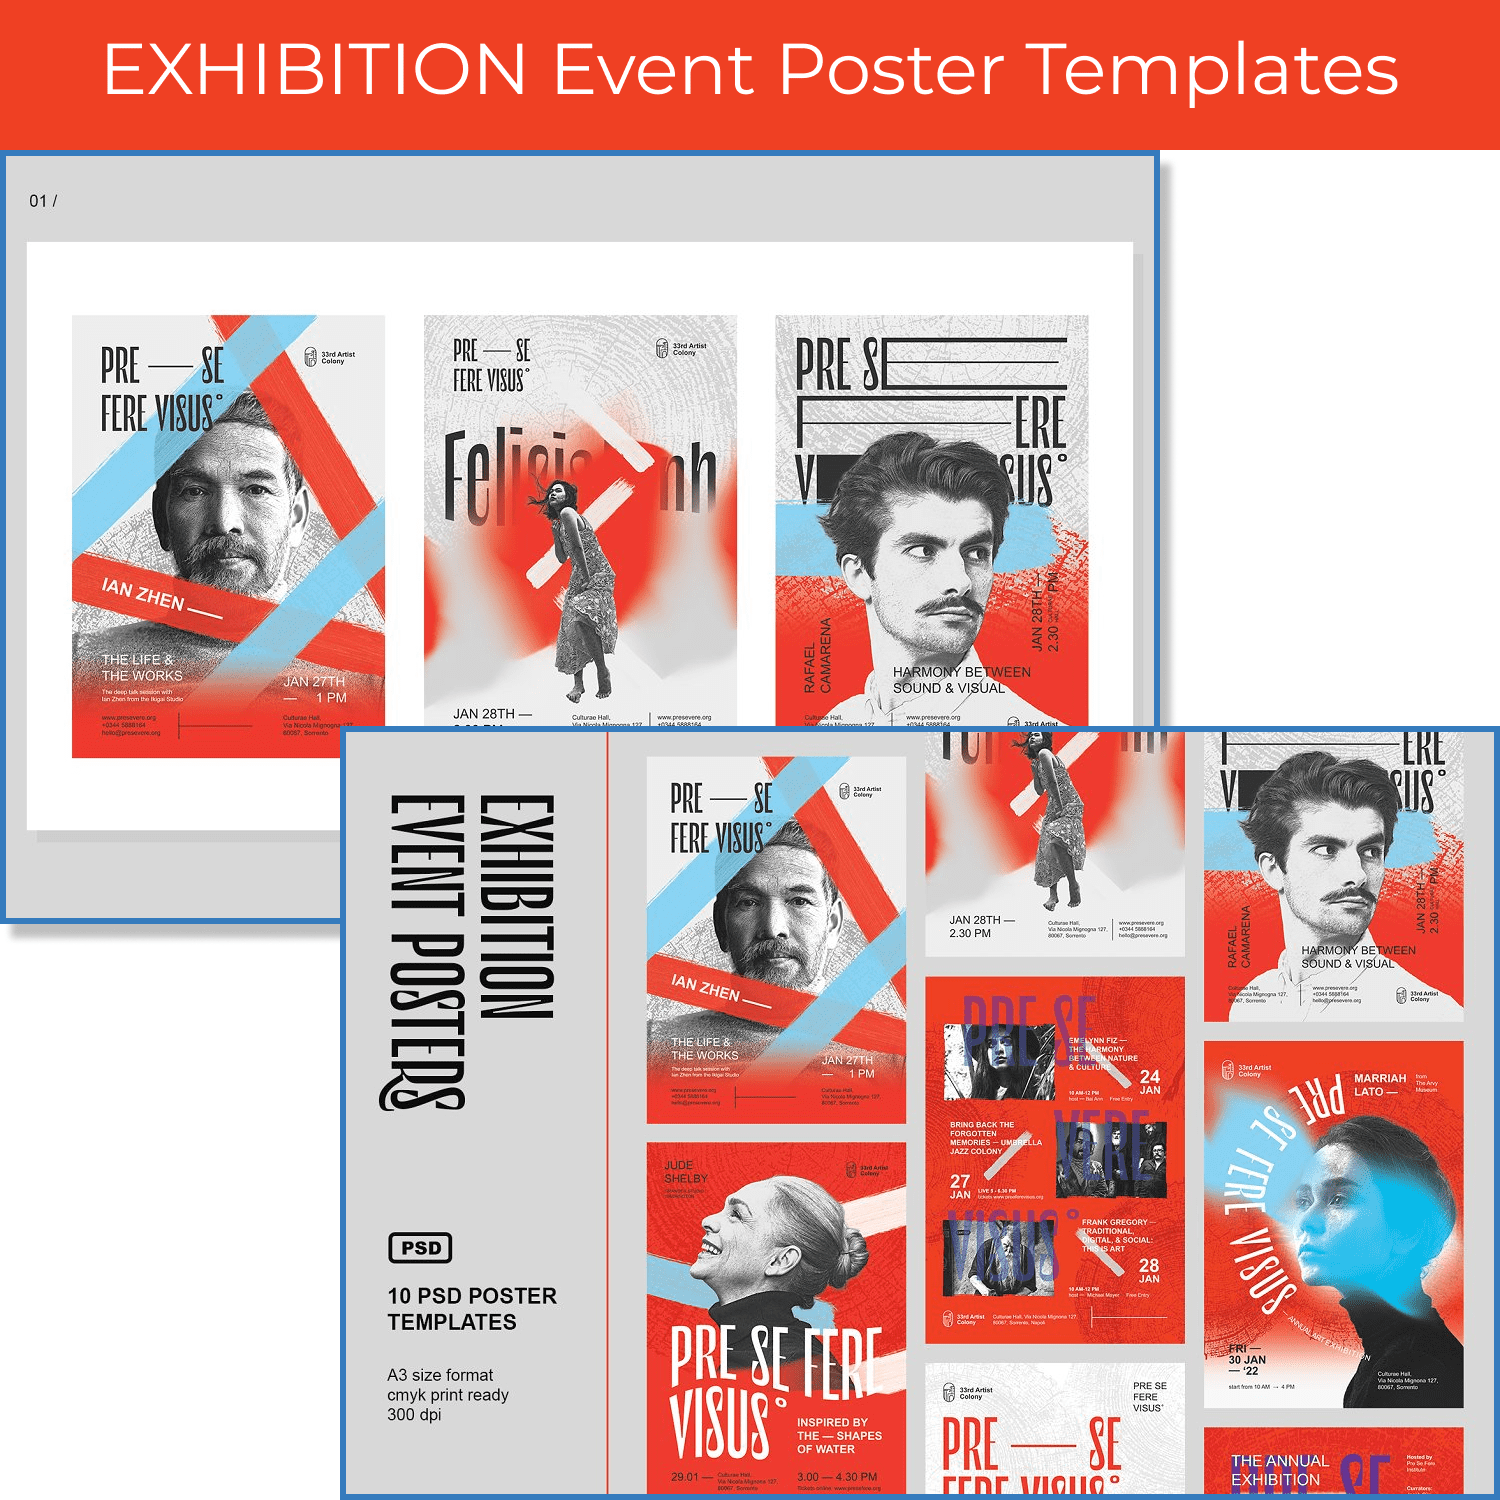 EXHIBITION Event Poster Templates cover image.